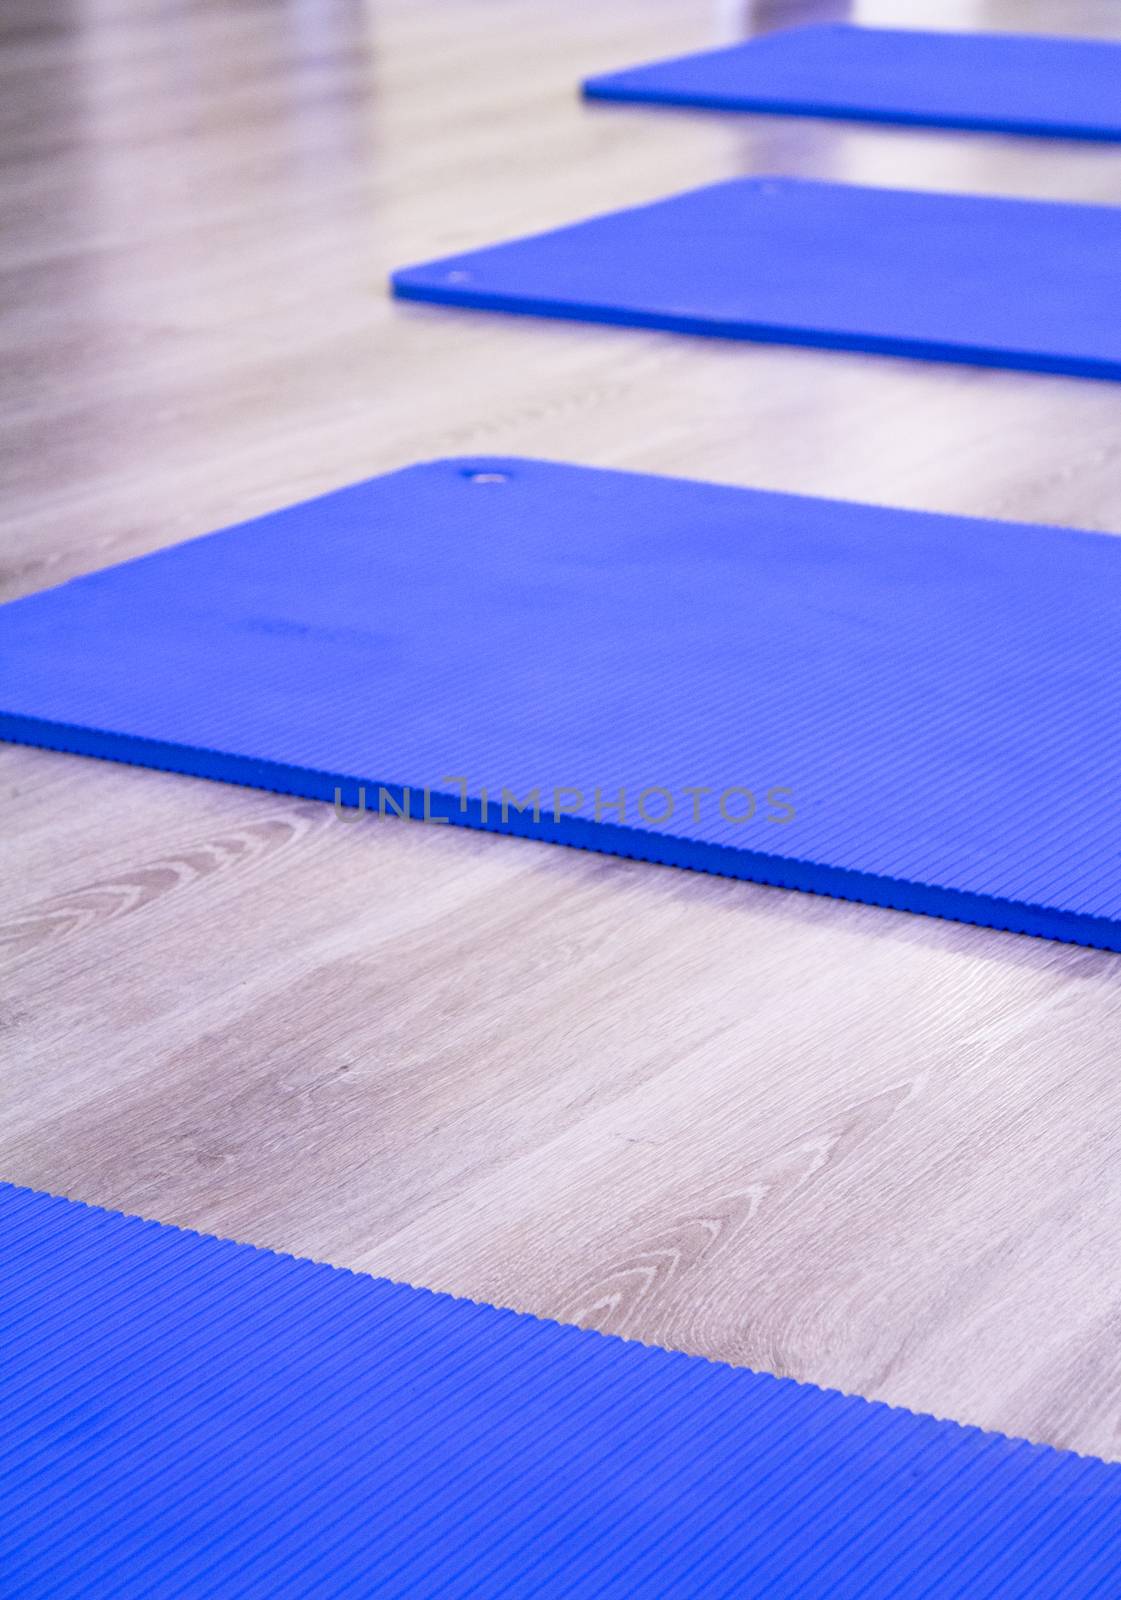 Yoga mat on wooden floor to perform meditation exercises